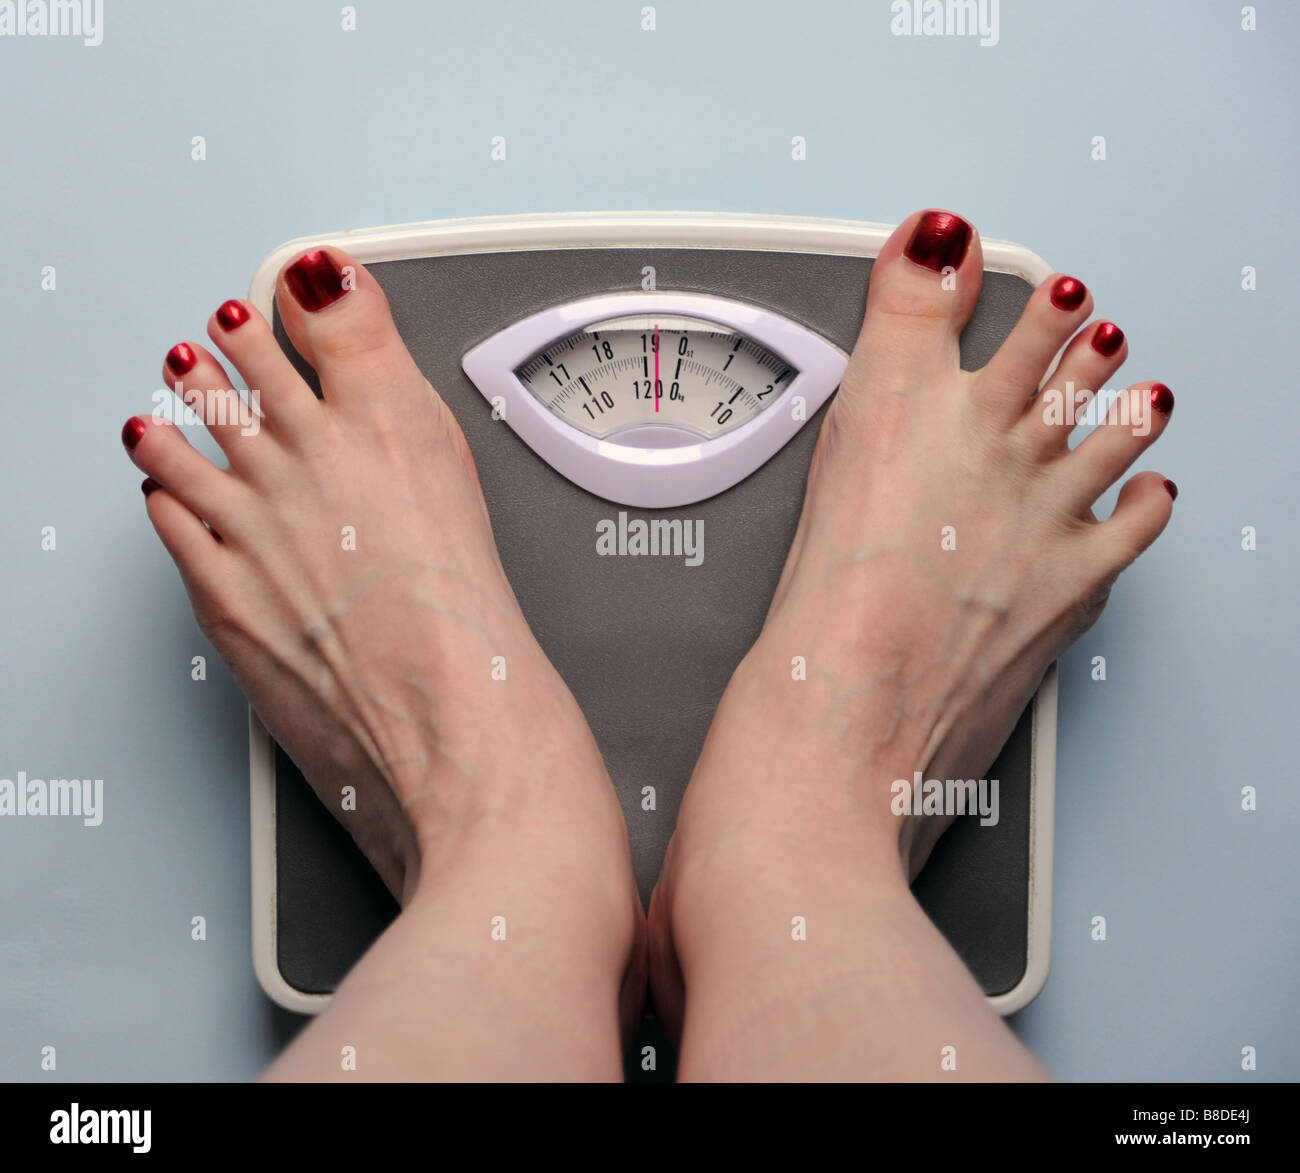 Feet on scales showing shock and horror Stock Photo